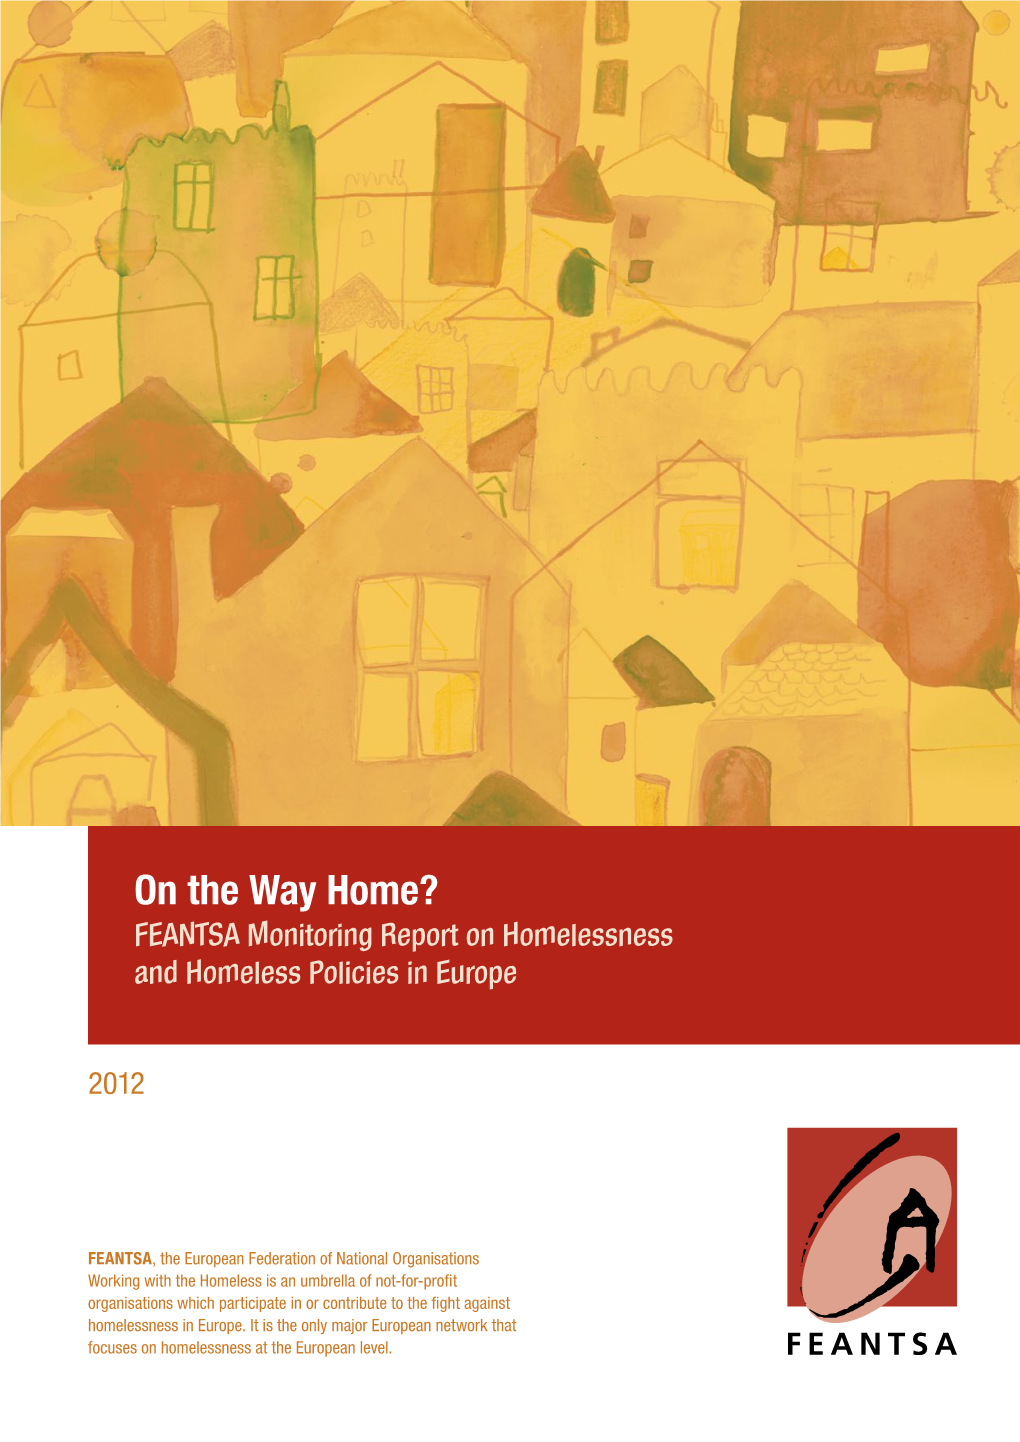 On the Way Home? FEANTSA Monitoring Report on Homelessness and Homeless Policies in Europe